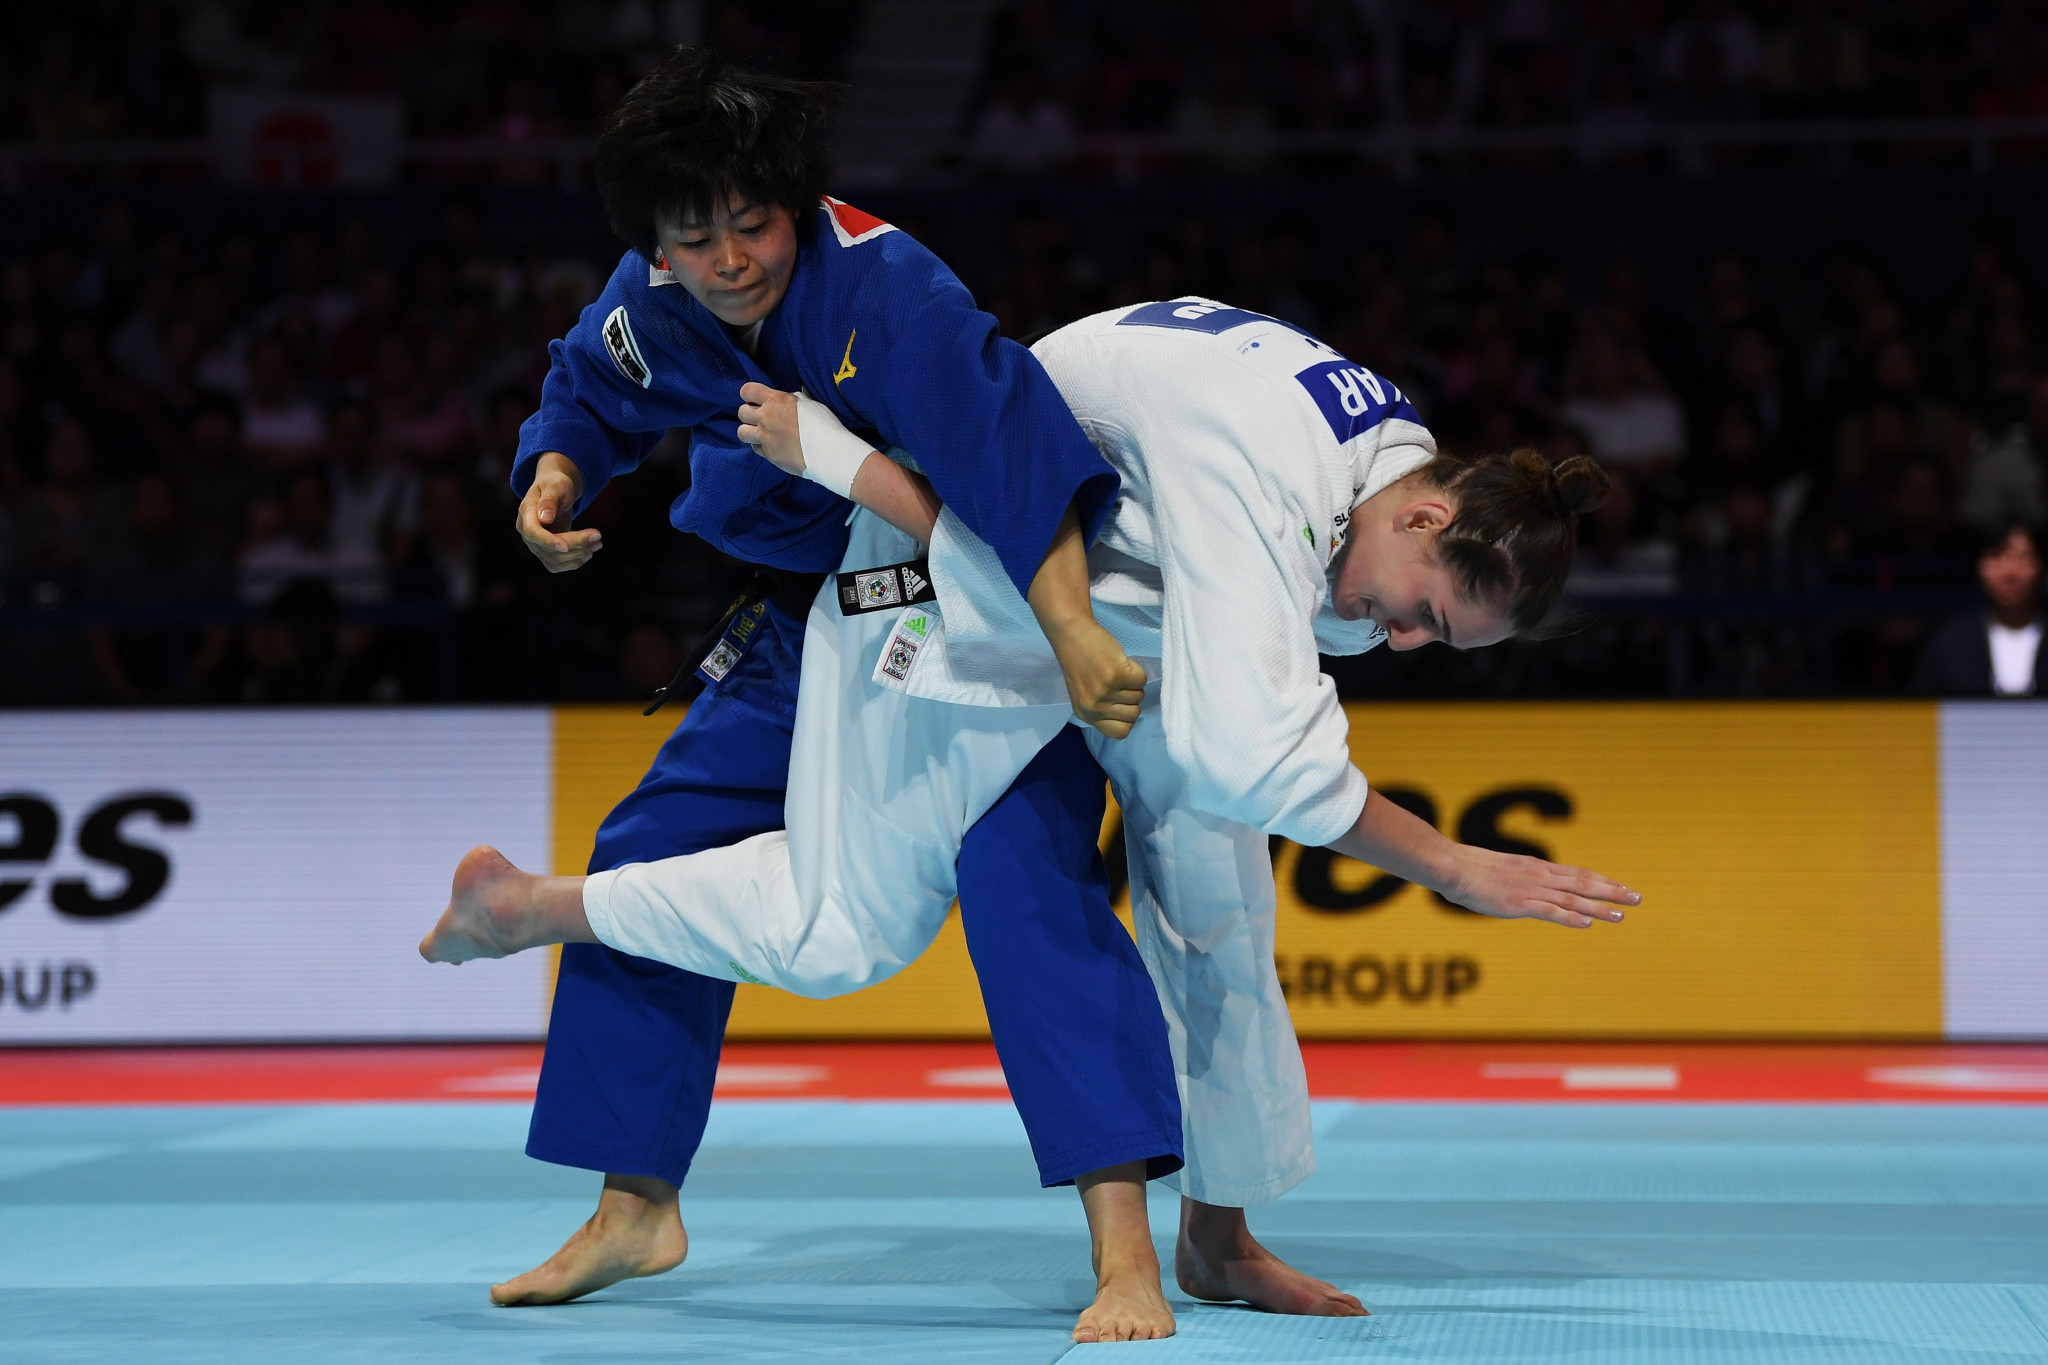 Hamada, in blue, was not able to defend her world title in front of a home crowd in Tokyo ©Getty Images